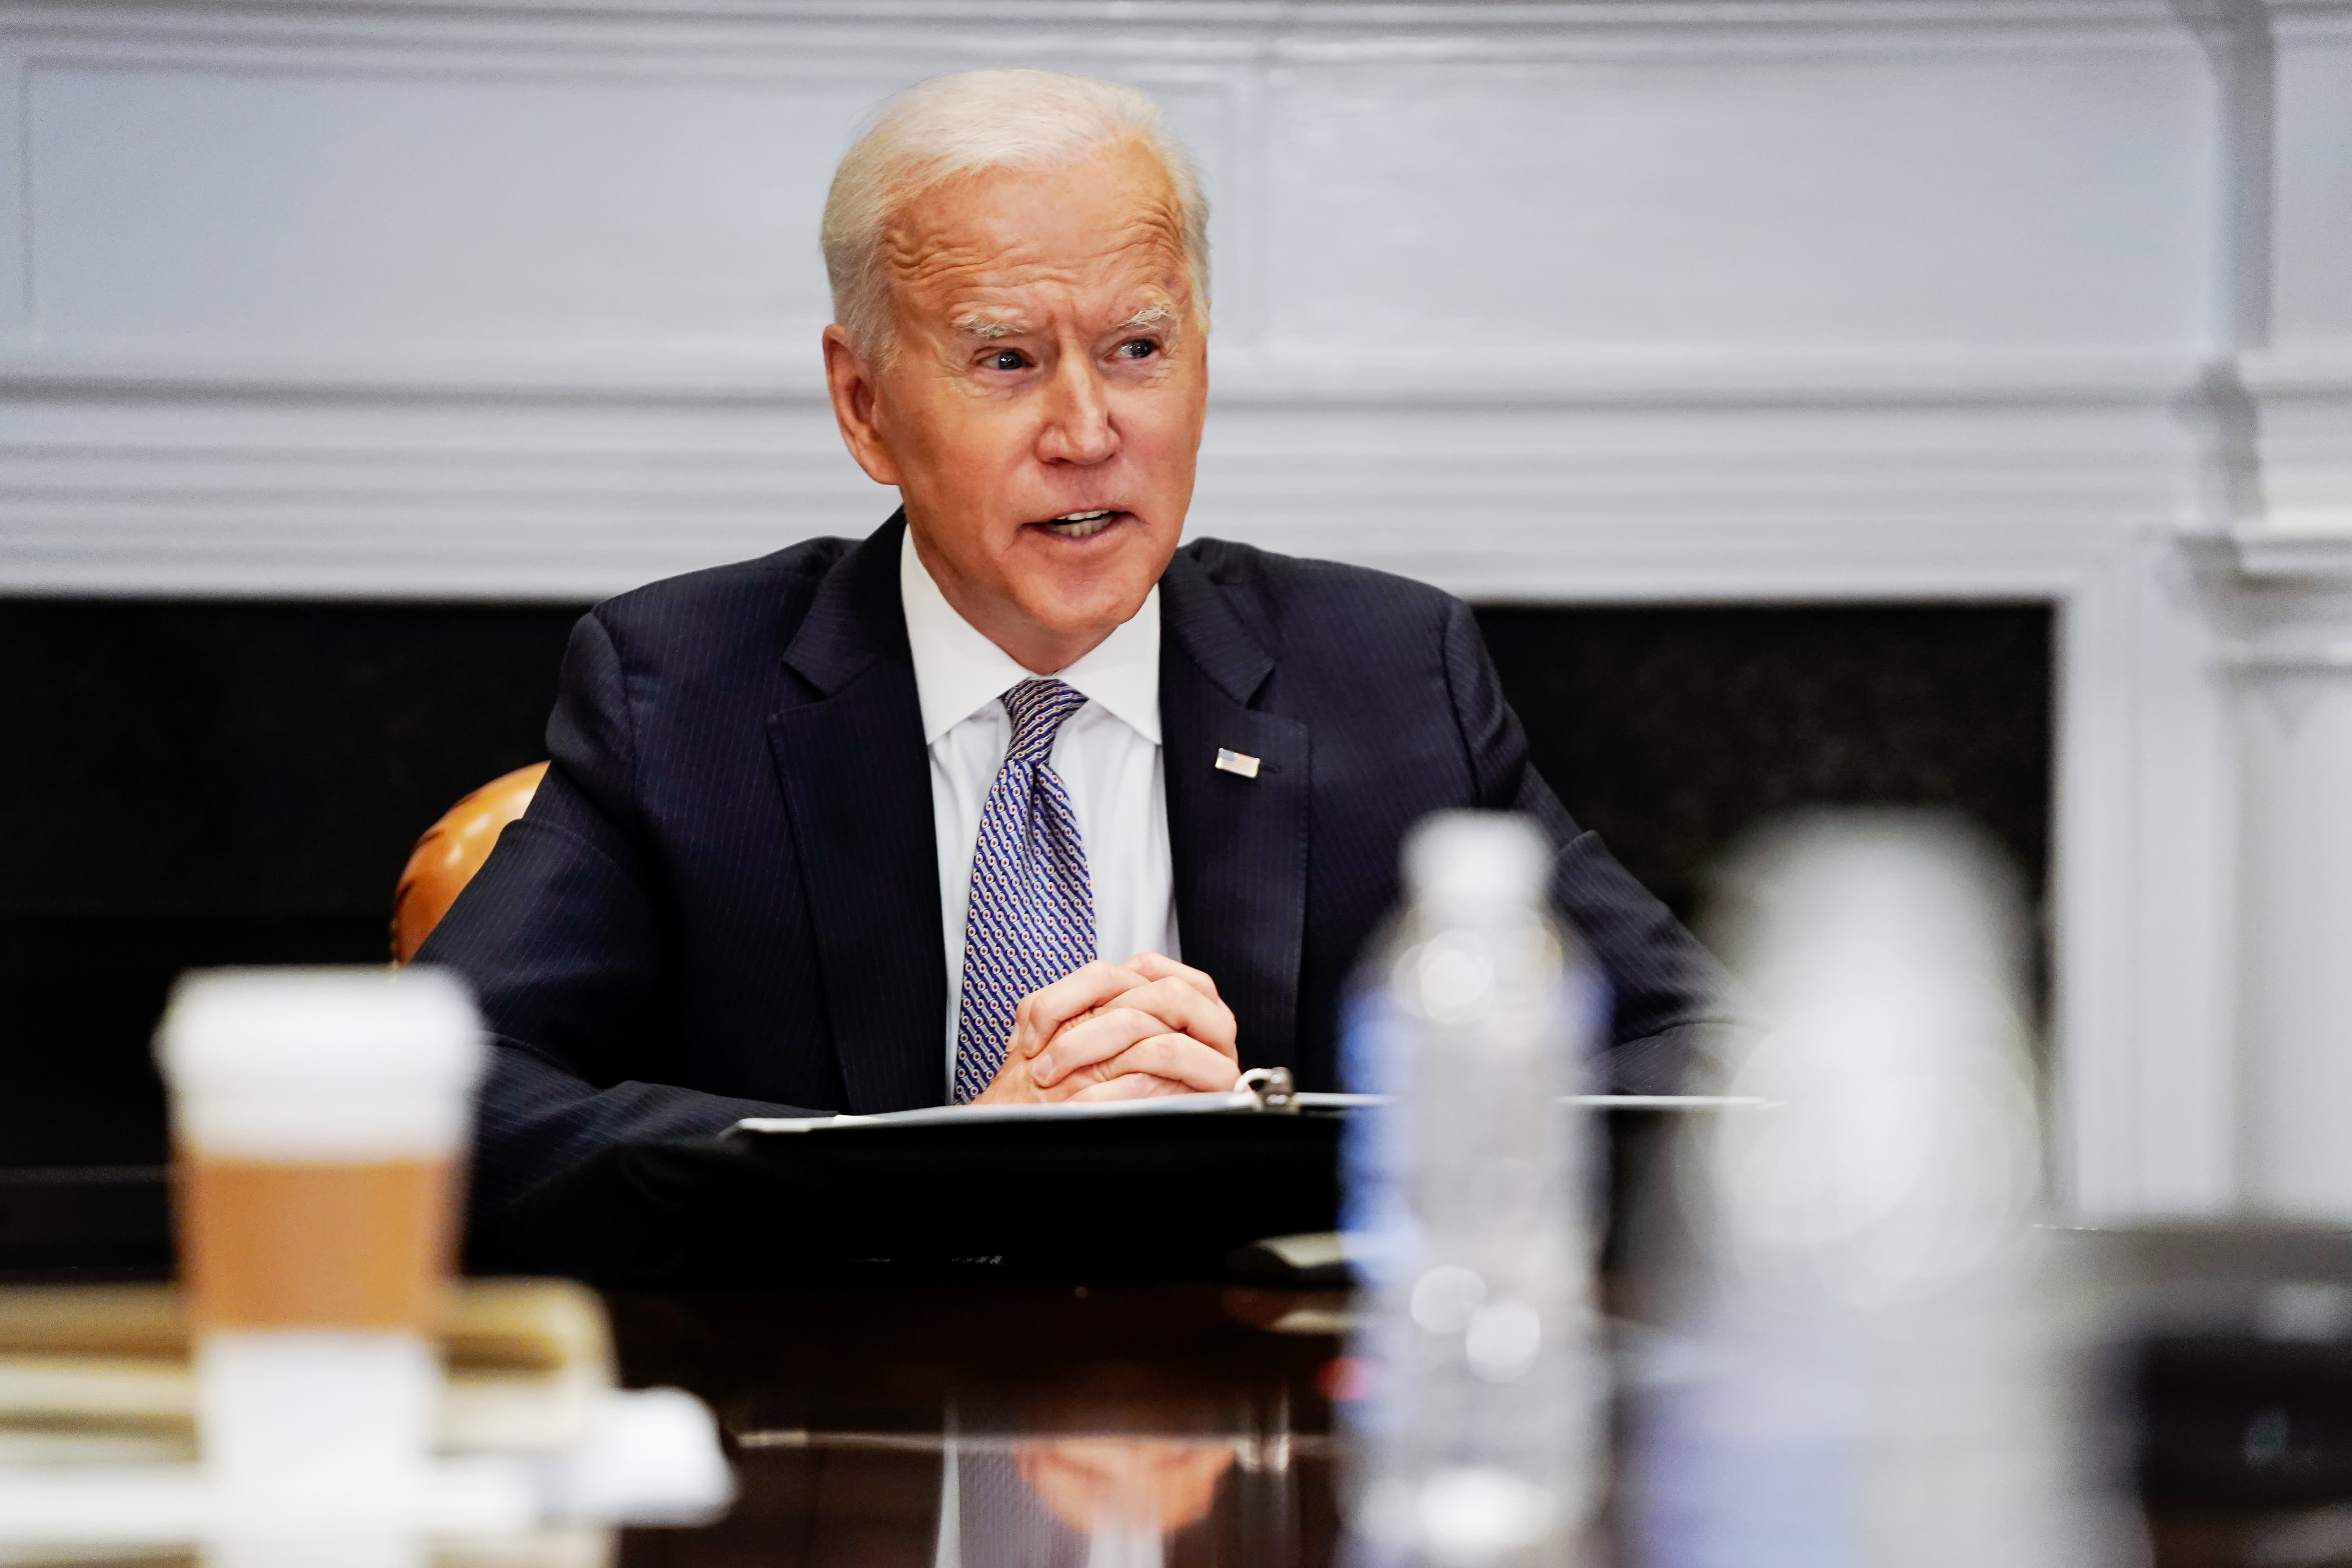 Executives are calling on Biden to cut emissions to combat climate change